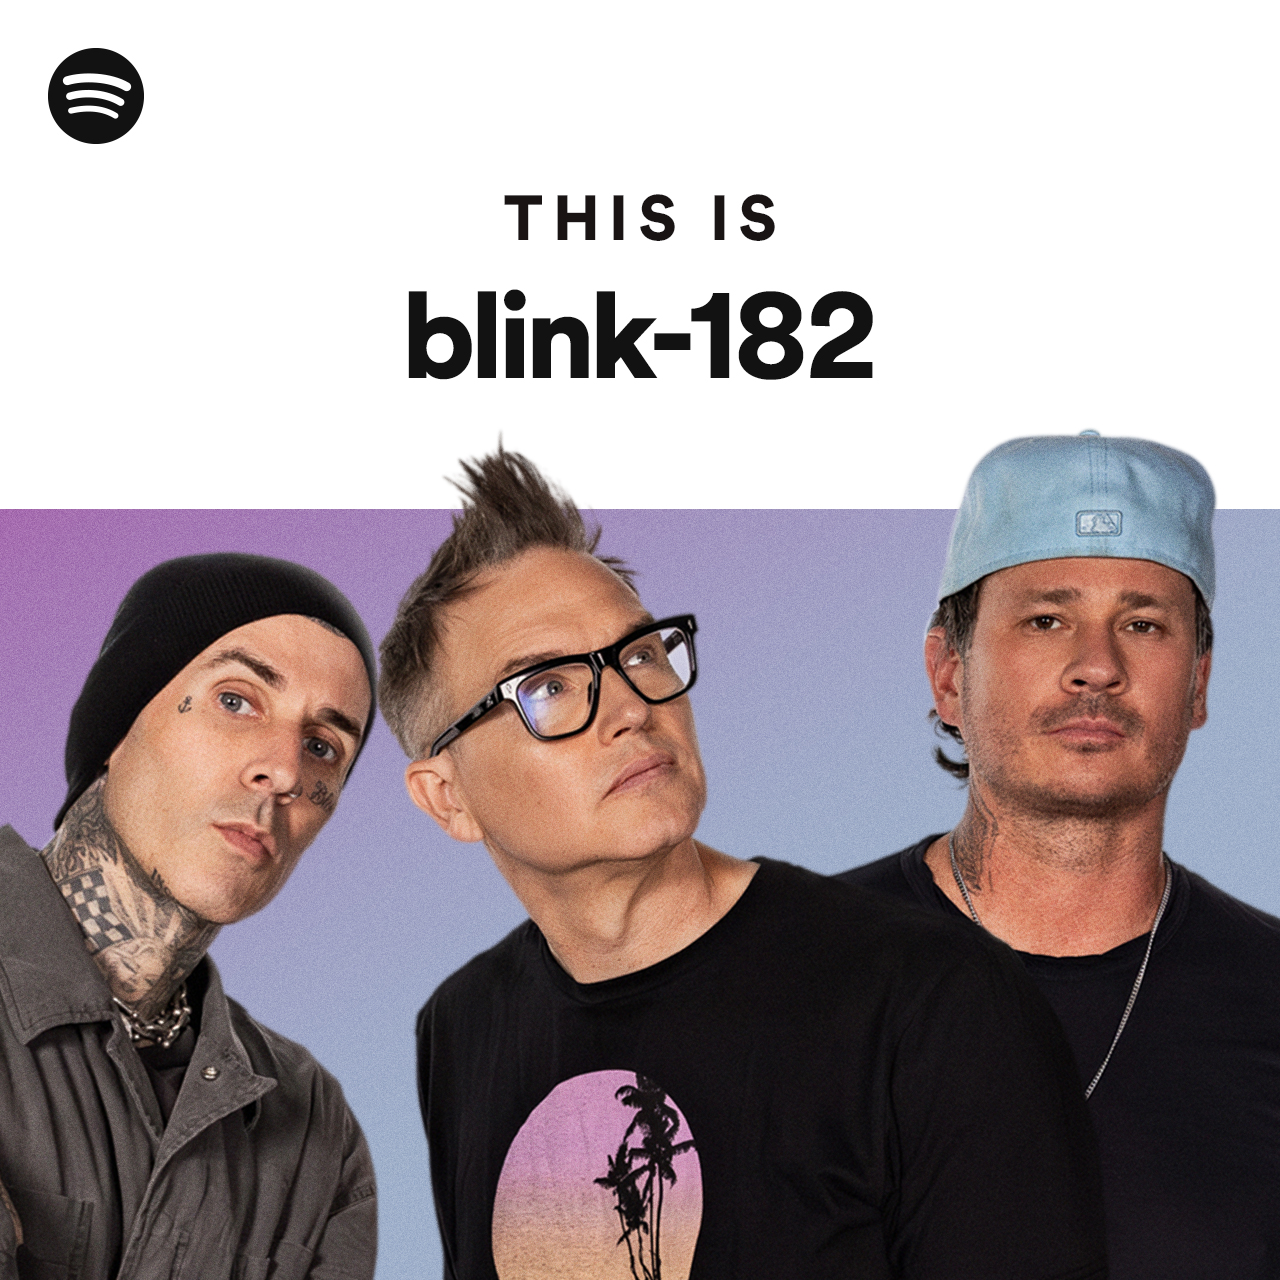 This Is blink-182 by spotify Spotify Playlist